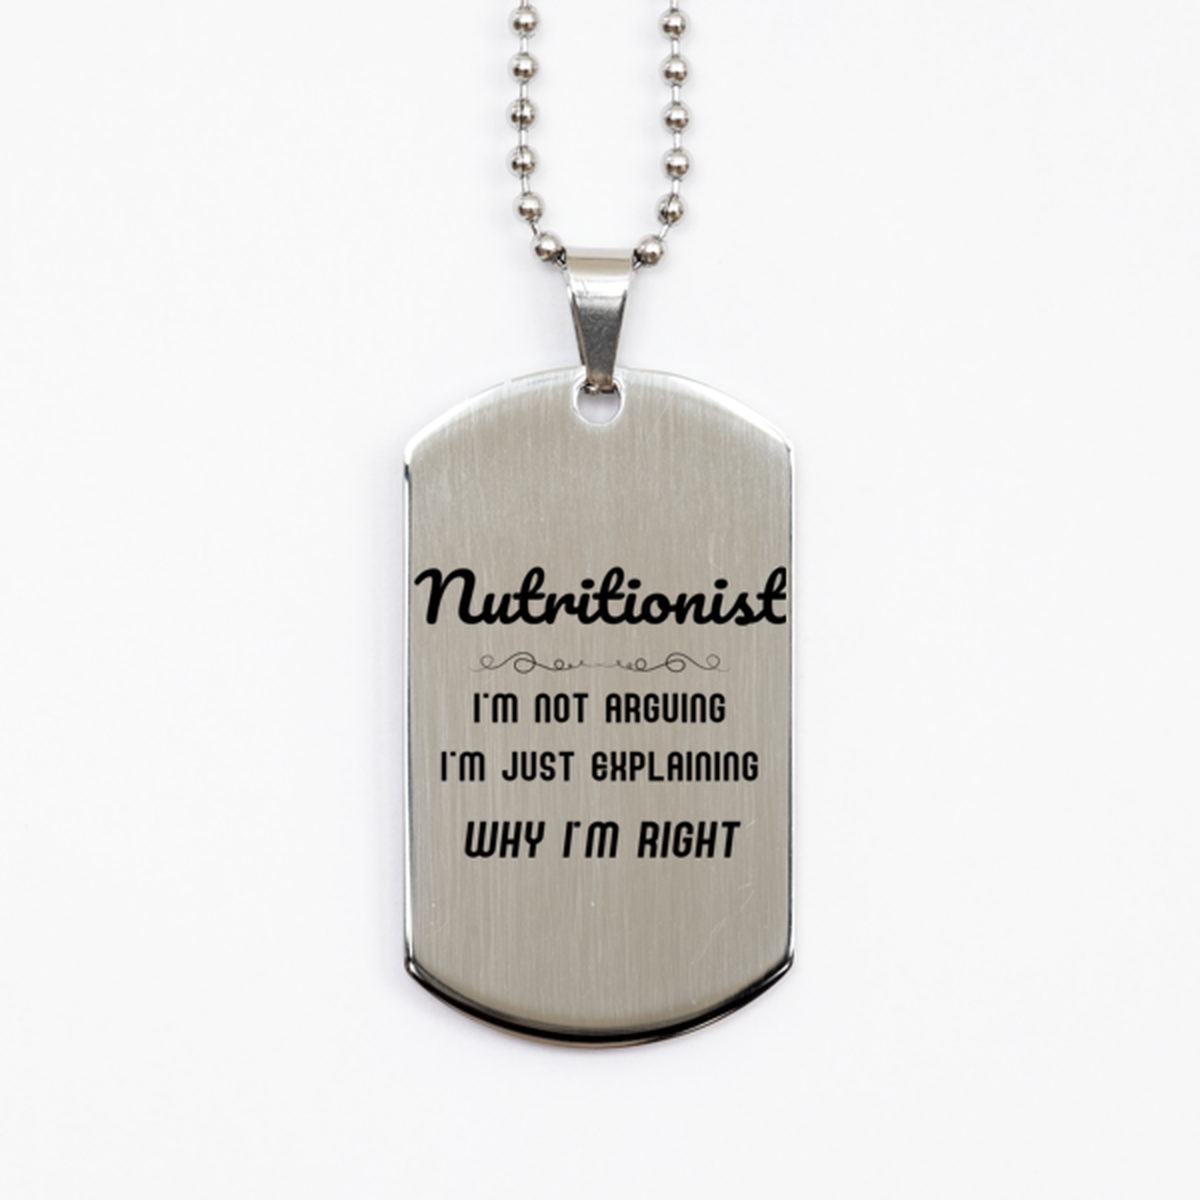 Nutritionist I'm not Arguing. I'm Just Explaining Why I'm RIGHT Silver Dog Tag, Funny Saying Quote Nutritionist Gifts For Nutritionist Graduation Birthday Christmas Gifts for Men Women Coworker